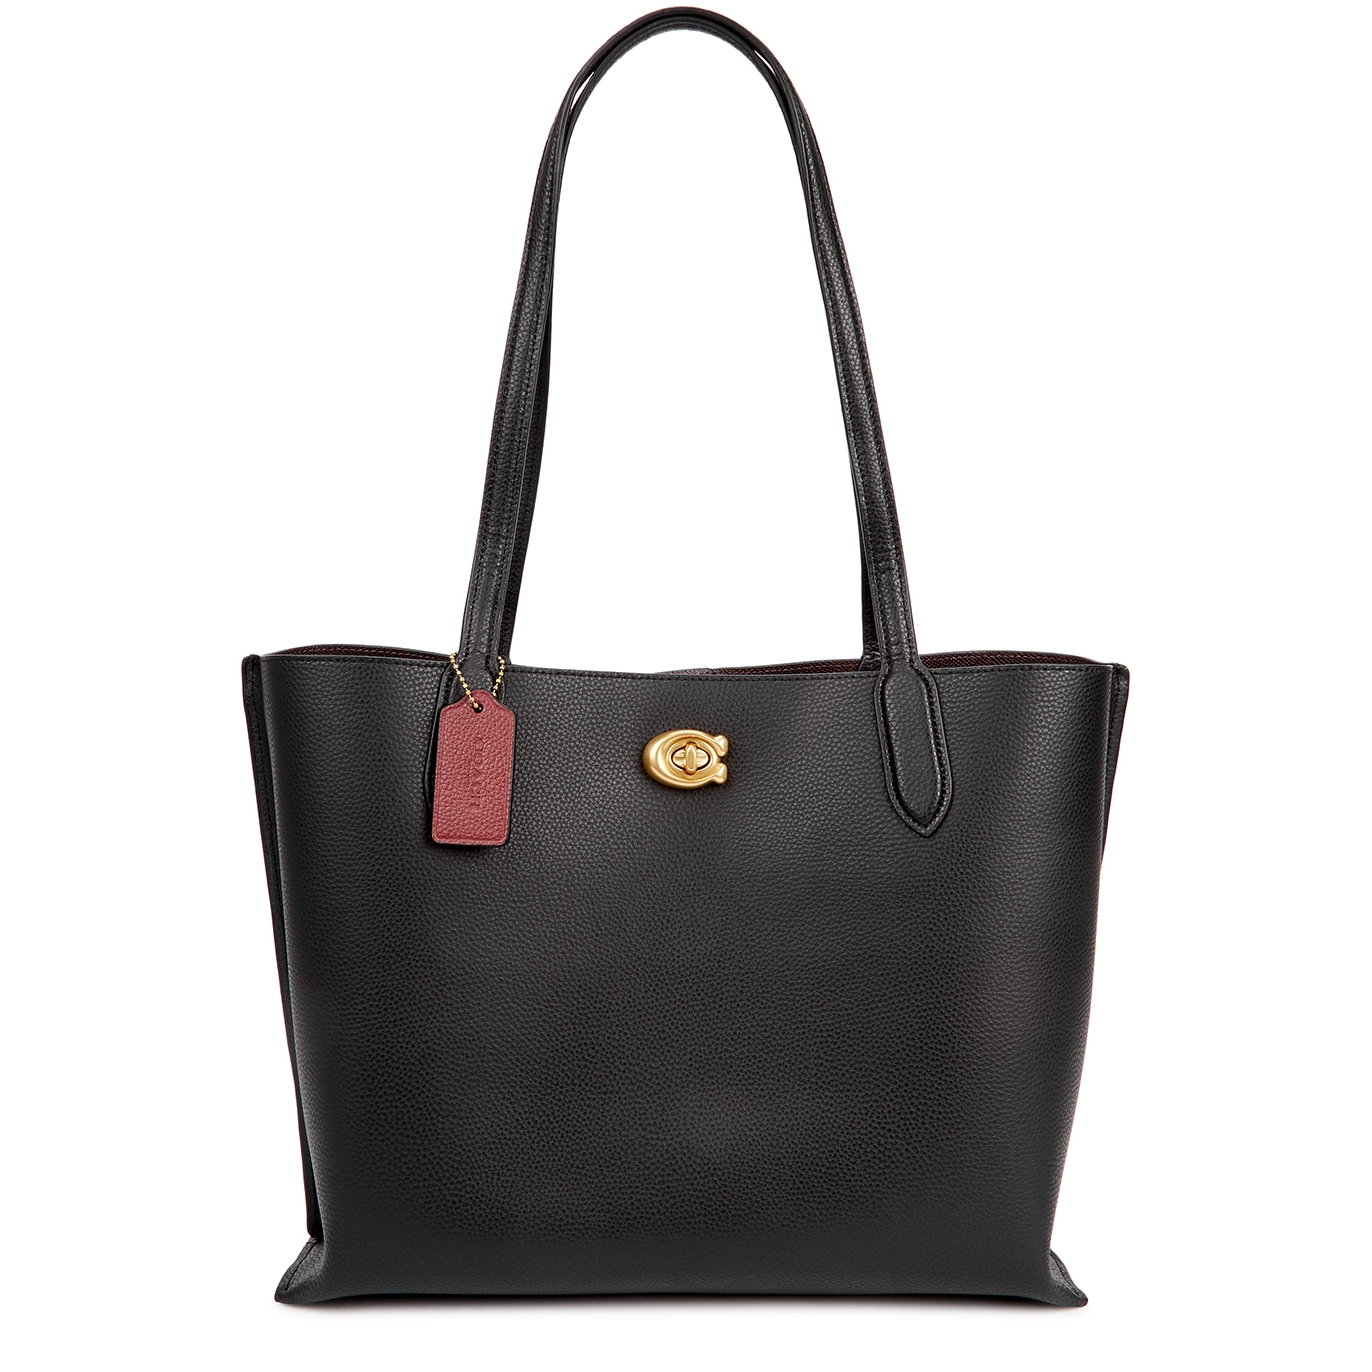 Coach Willow Leather Tote - Black